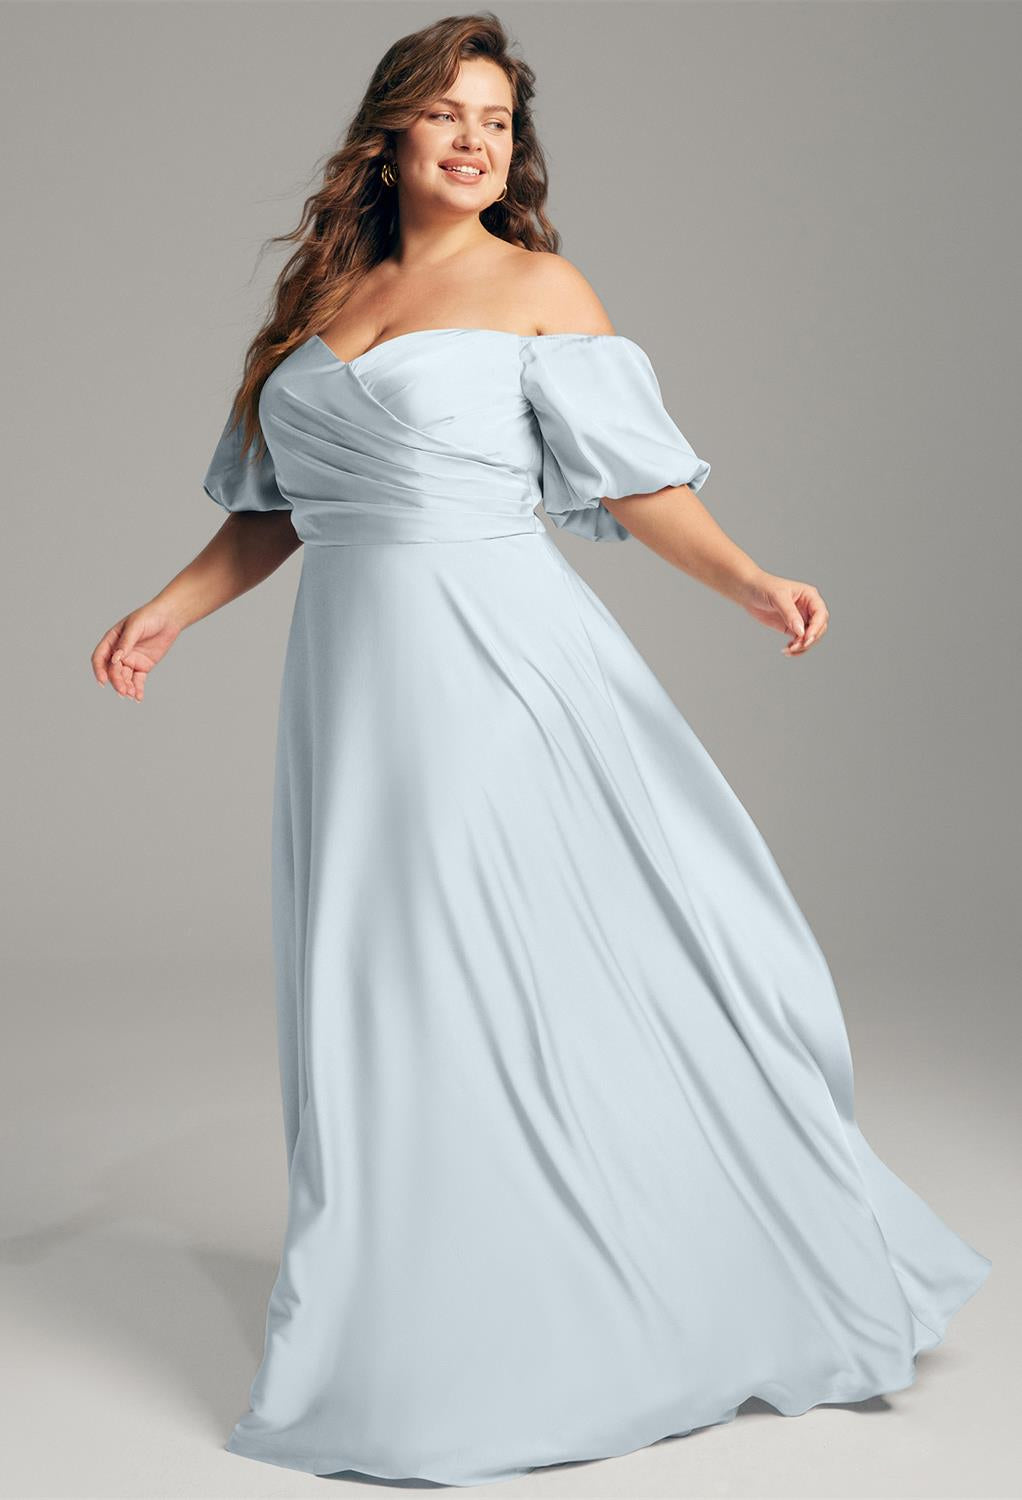 A plus size bridesmaid in a Dey - Satin Charmeuse Bridesmaid Dress - Off The Rack by Bergamot Bridal.